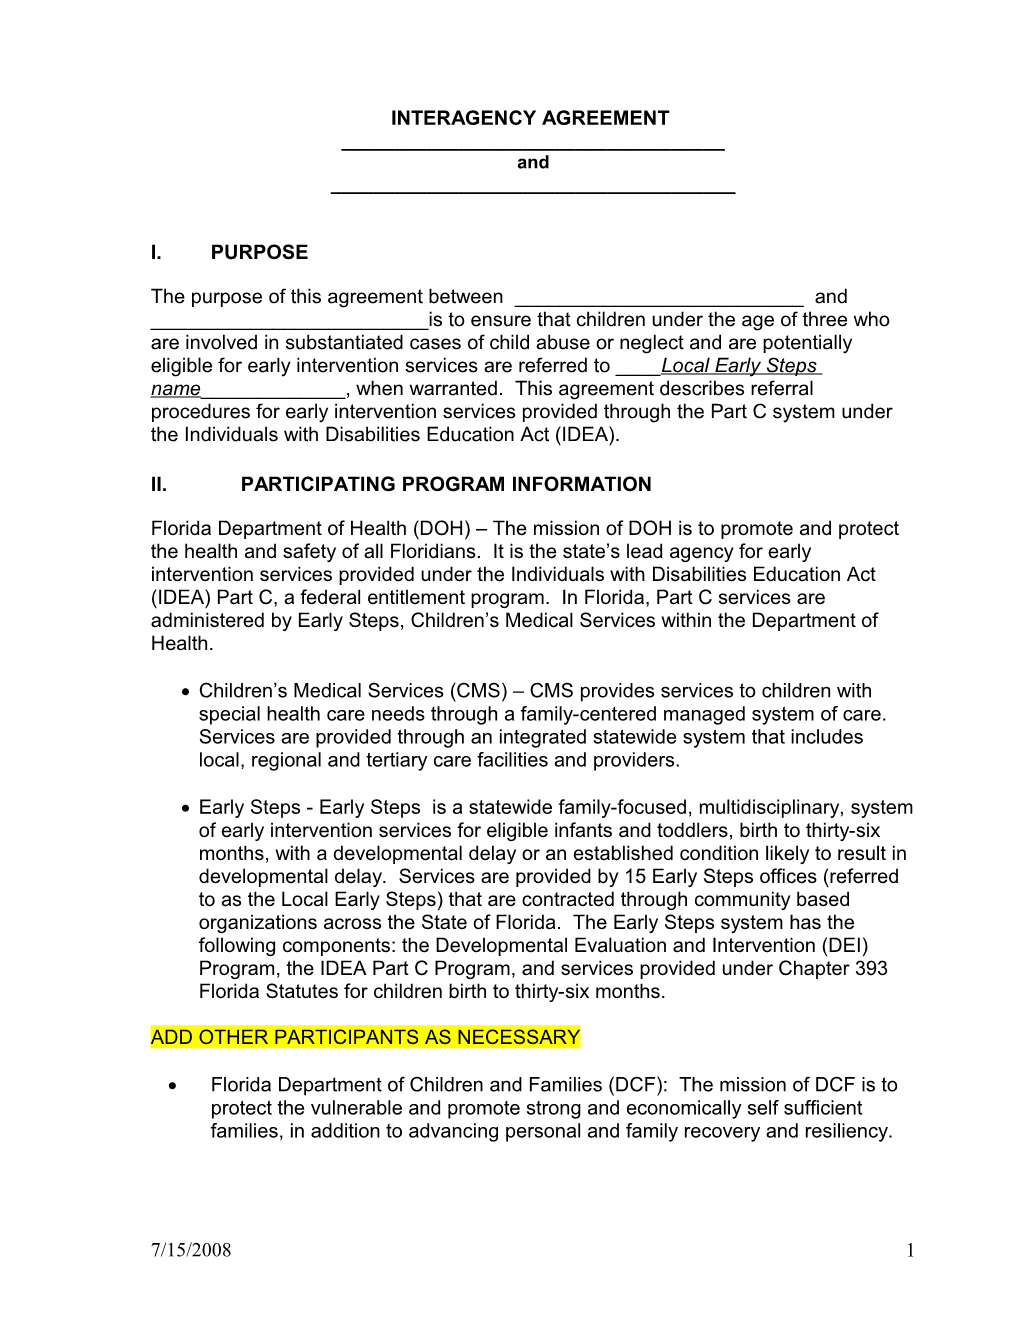 Interagency Agreement Between the Florida Department of Children and Families and the Florida